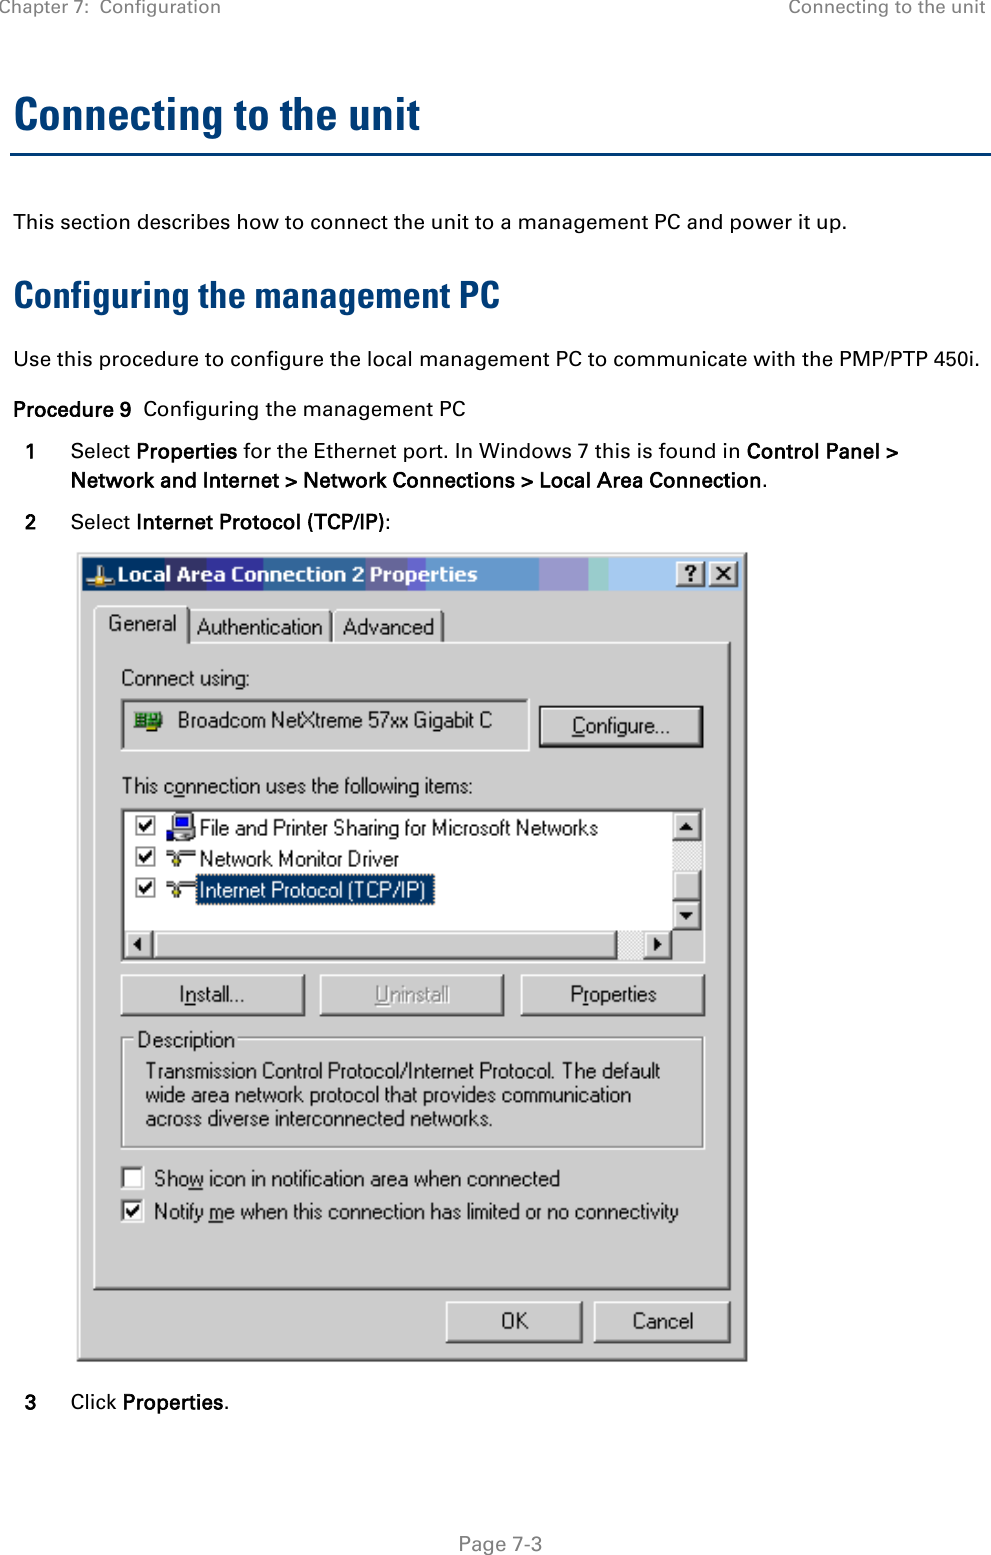 Chapter 7:  Configuration Connecting to the unit   Page 7-3 Connecting to the unit This section describes how to connect the unit to a management PC and power it up.  Configuring the management PC Use this procedure to configure the local management PC to communicate with the PMP/PTP 450i. Procedure 9  Configuring the management PC 1 Select Properties for the Ethernet port. In Windows 7 this is found in Control Panel &gt; Network and Internet &gt; Network Connections &gt; Local Area Connection. 2 Select Internet Protocol (TCP/IP):  3 Click Properties. 